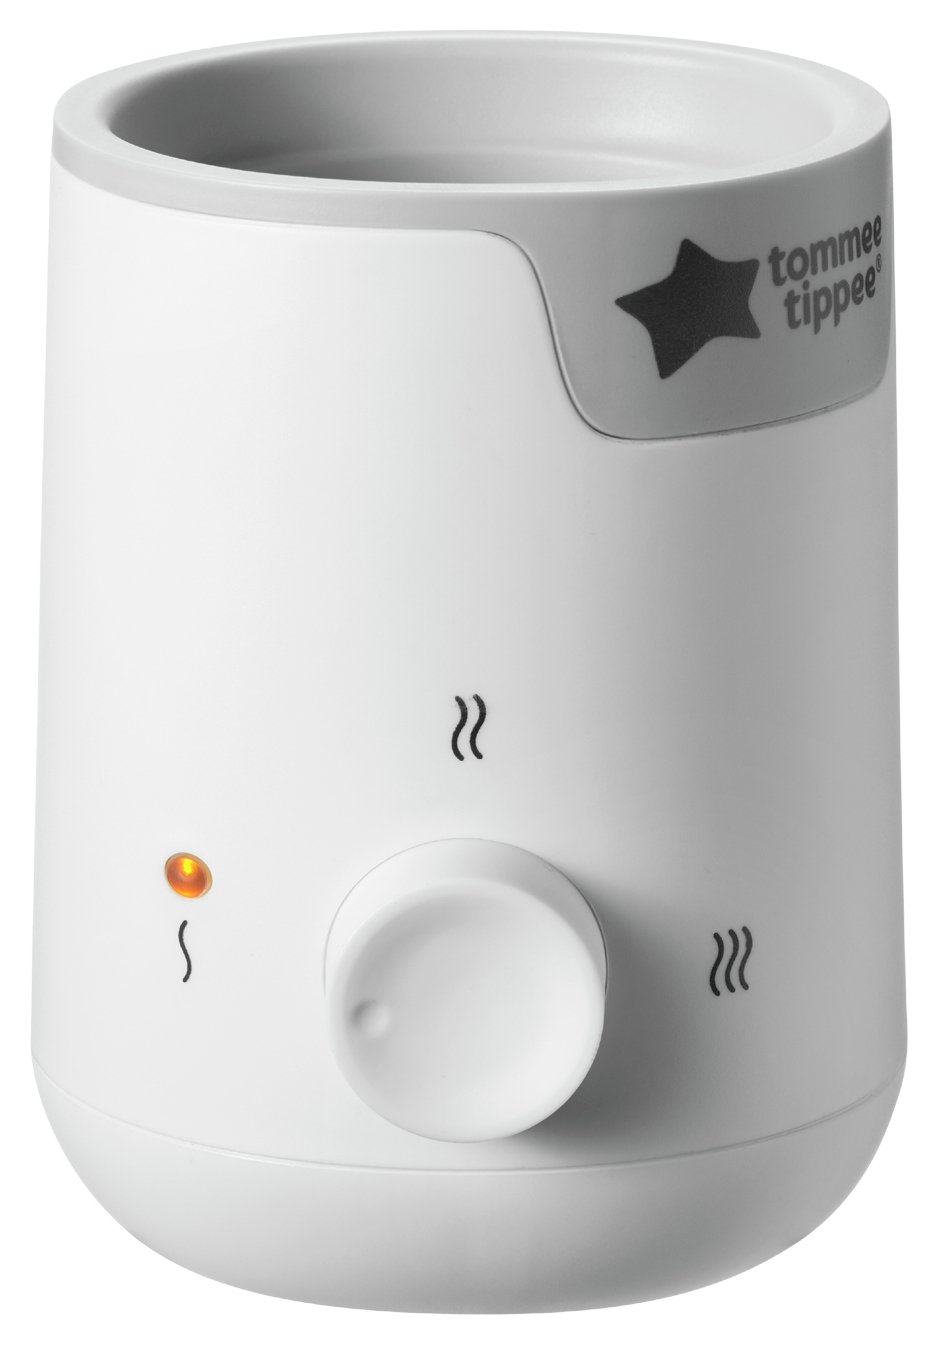 Tommee Tippee 3-in-1 Electric Baby Bottle and Food Warmer